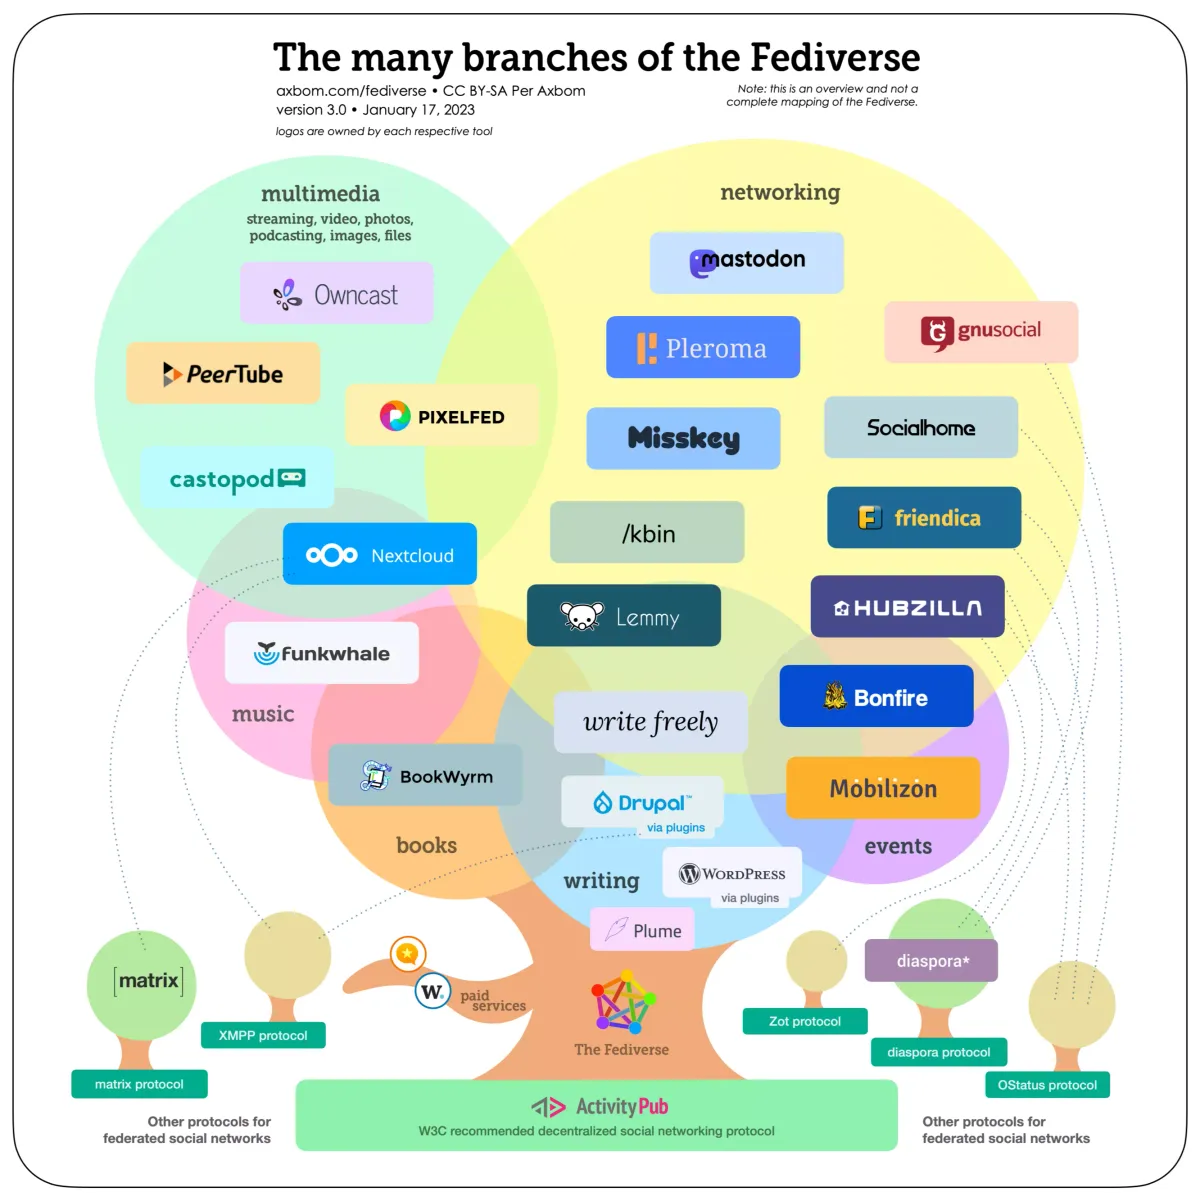 This image shows a tree with the different branches of the Fediverse. It shows a few services like Mastodon, Pleroma, Pixelfed, Peertube, Castopod, Mobilizon and even more.